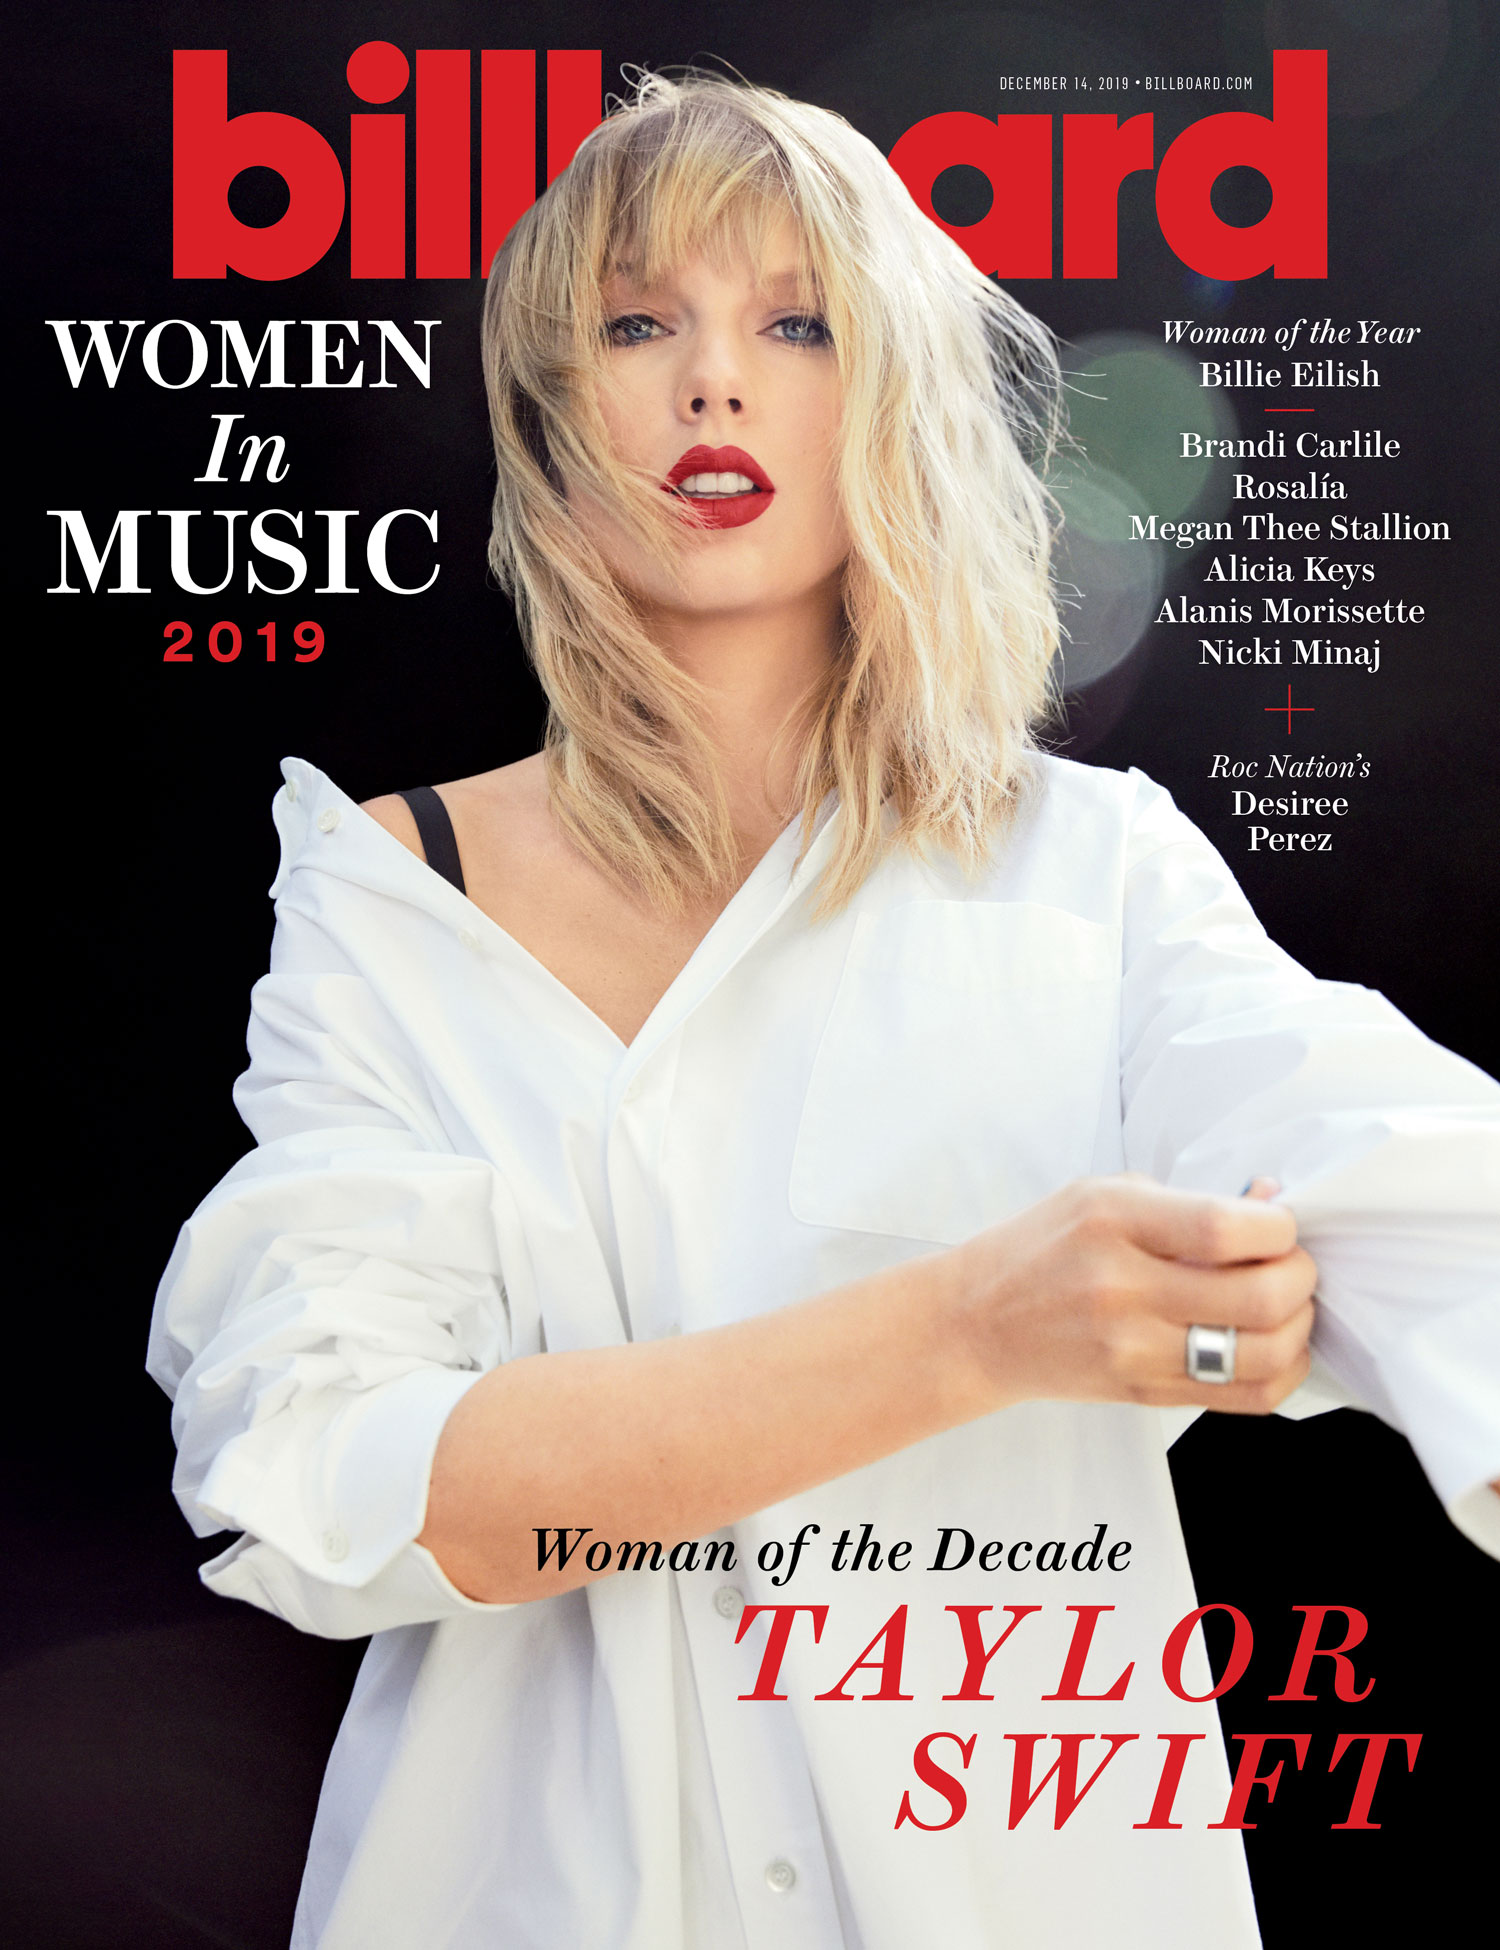 Taylor Swift Covers The New Issue Of Billboard Magazine BeautifulBallad